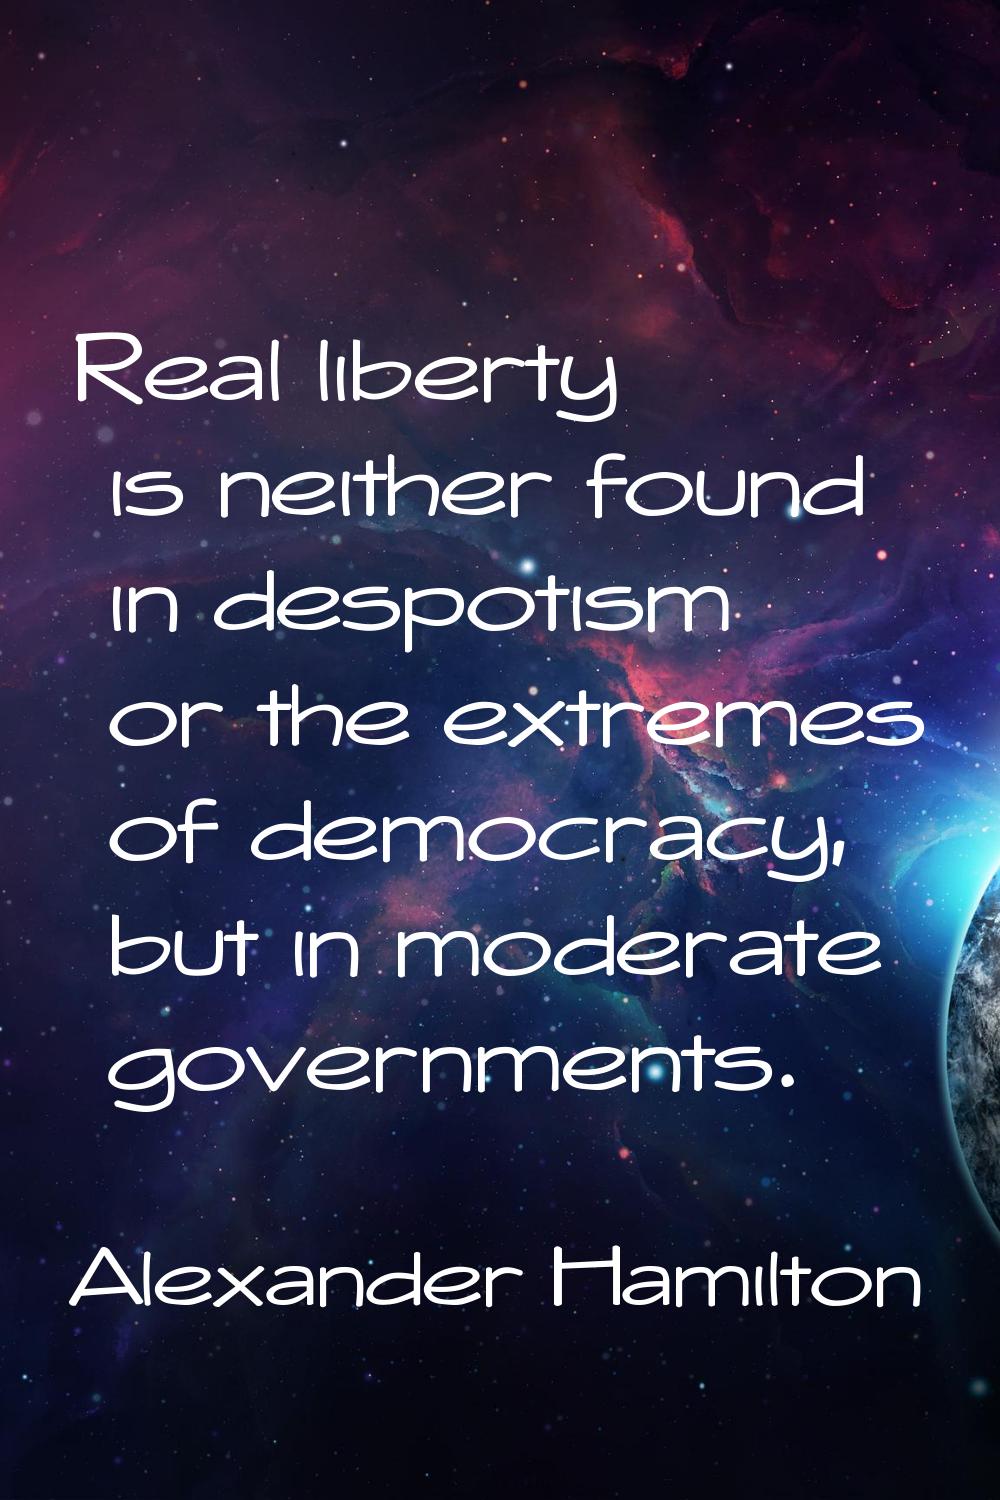 Real liberty is neither found in despotism or the extremes of democracy, but in moderate government